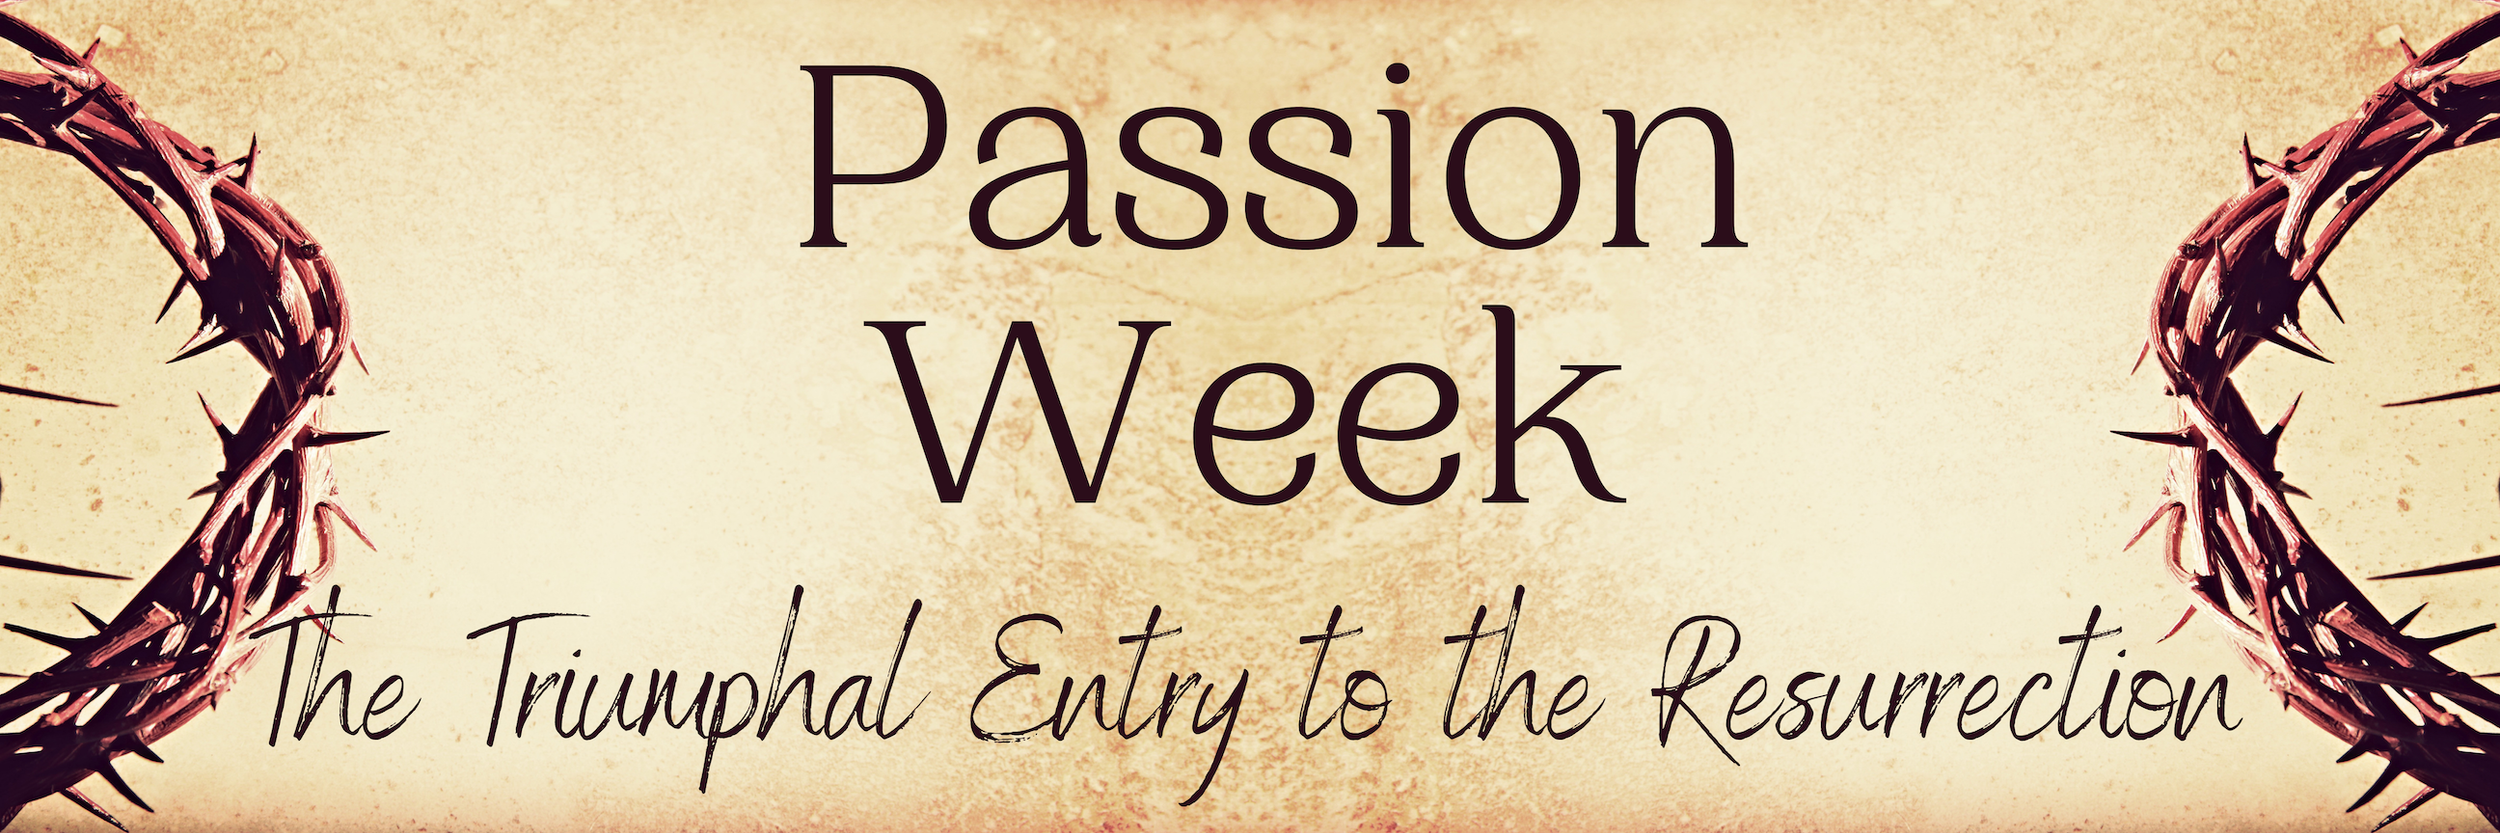 Passion Week-banner.png